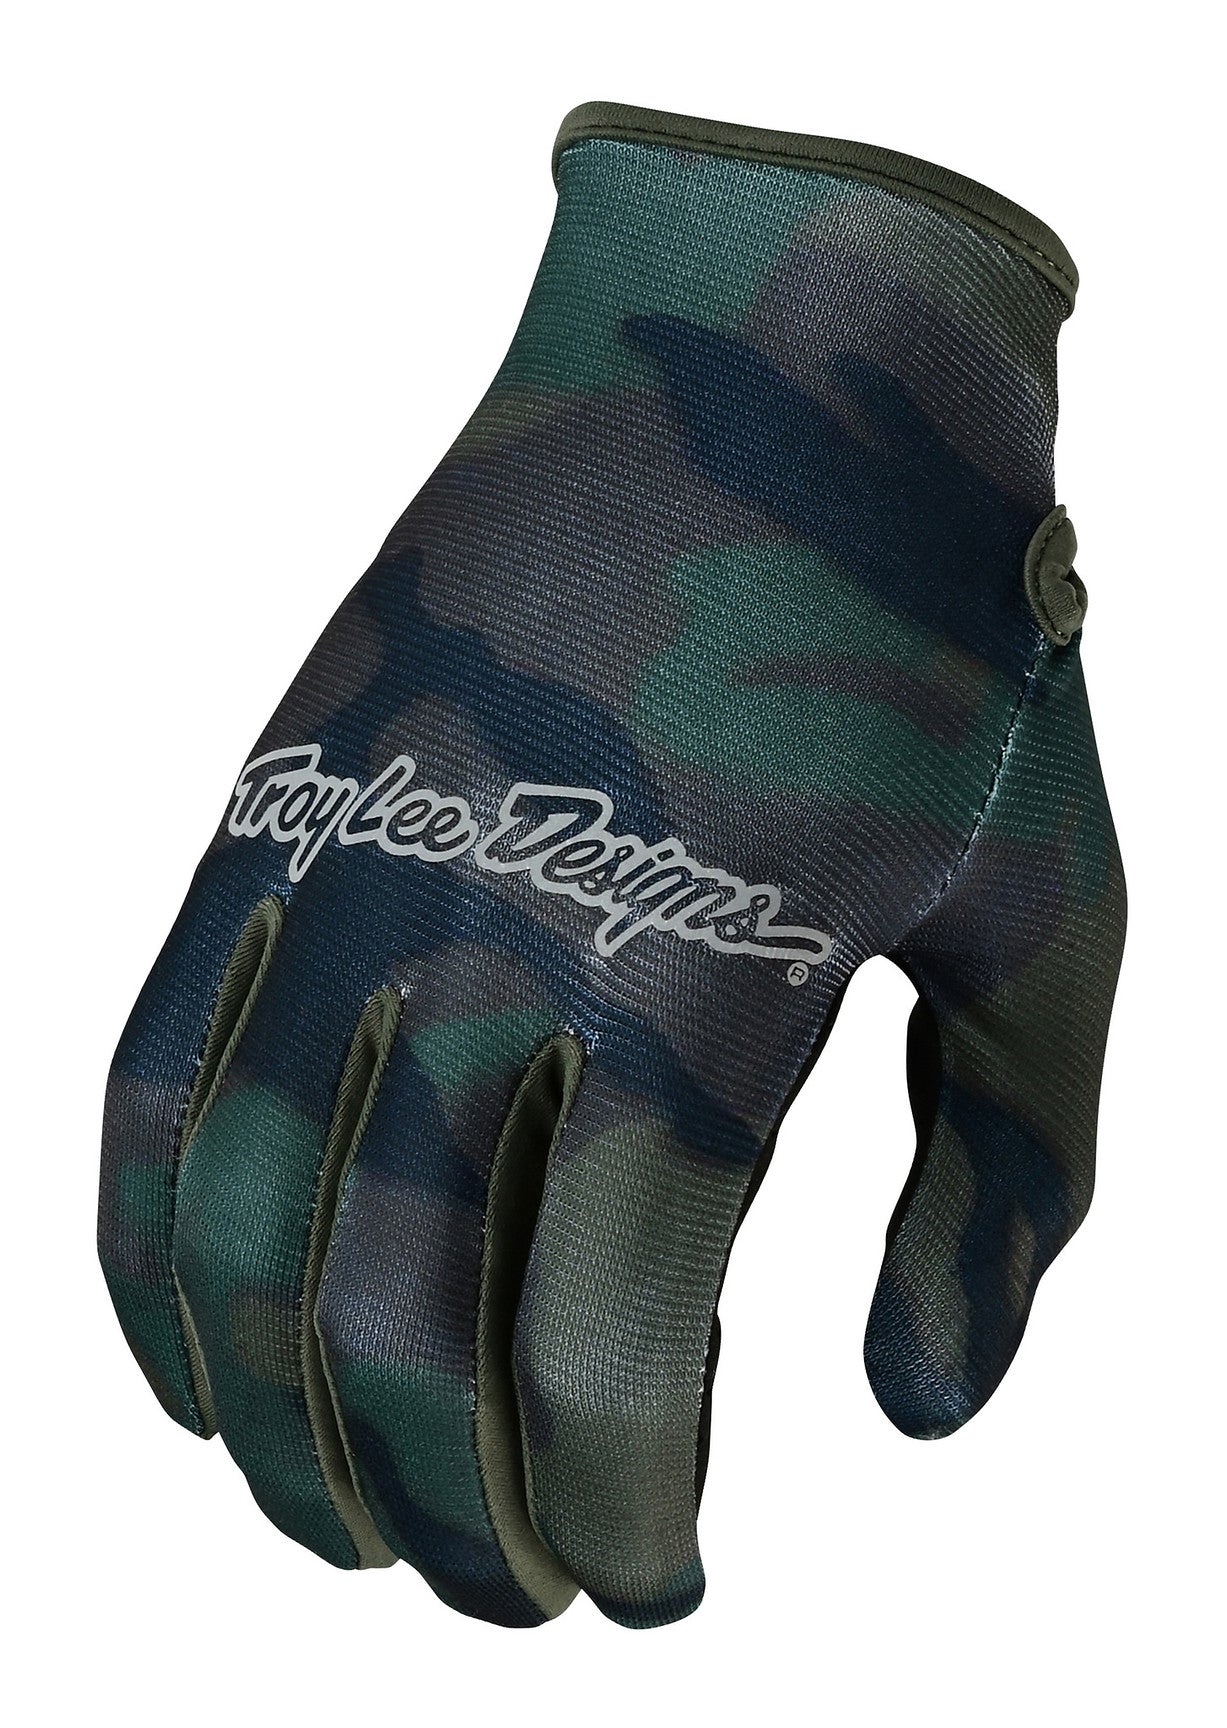 Troy Lee Designs Flowline Glove Brushed Camo Army Top Knuckle Side